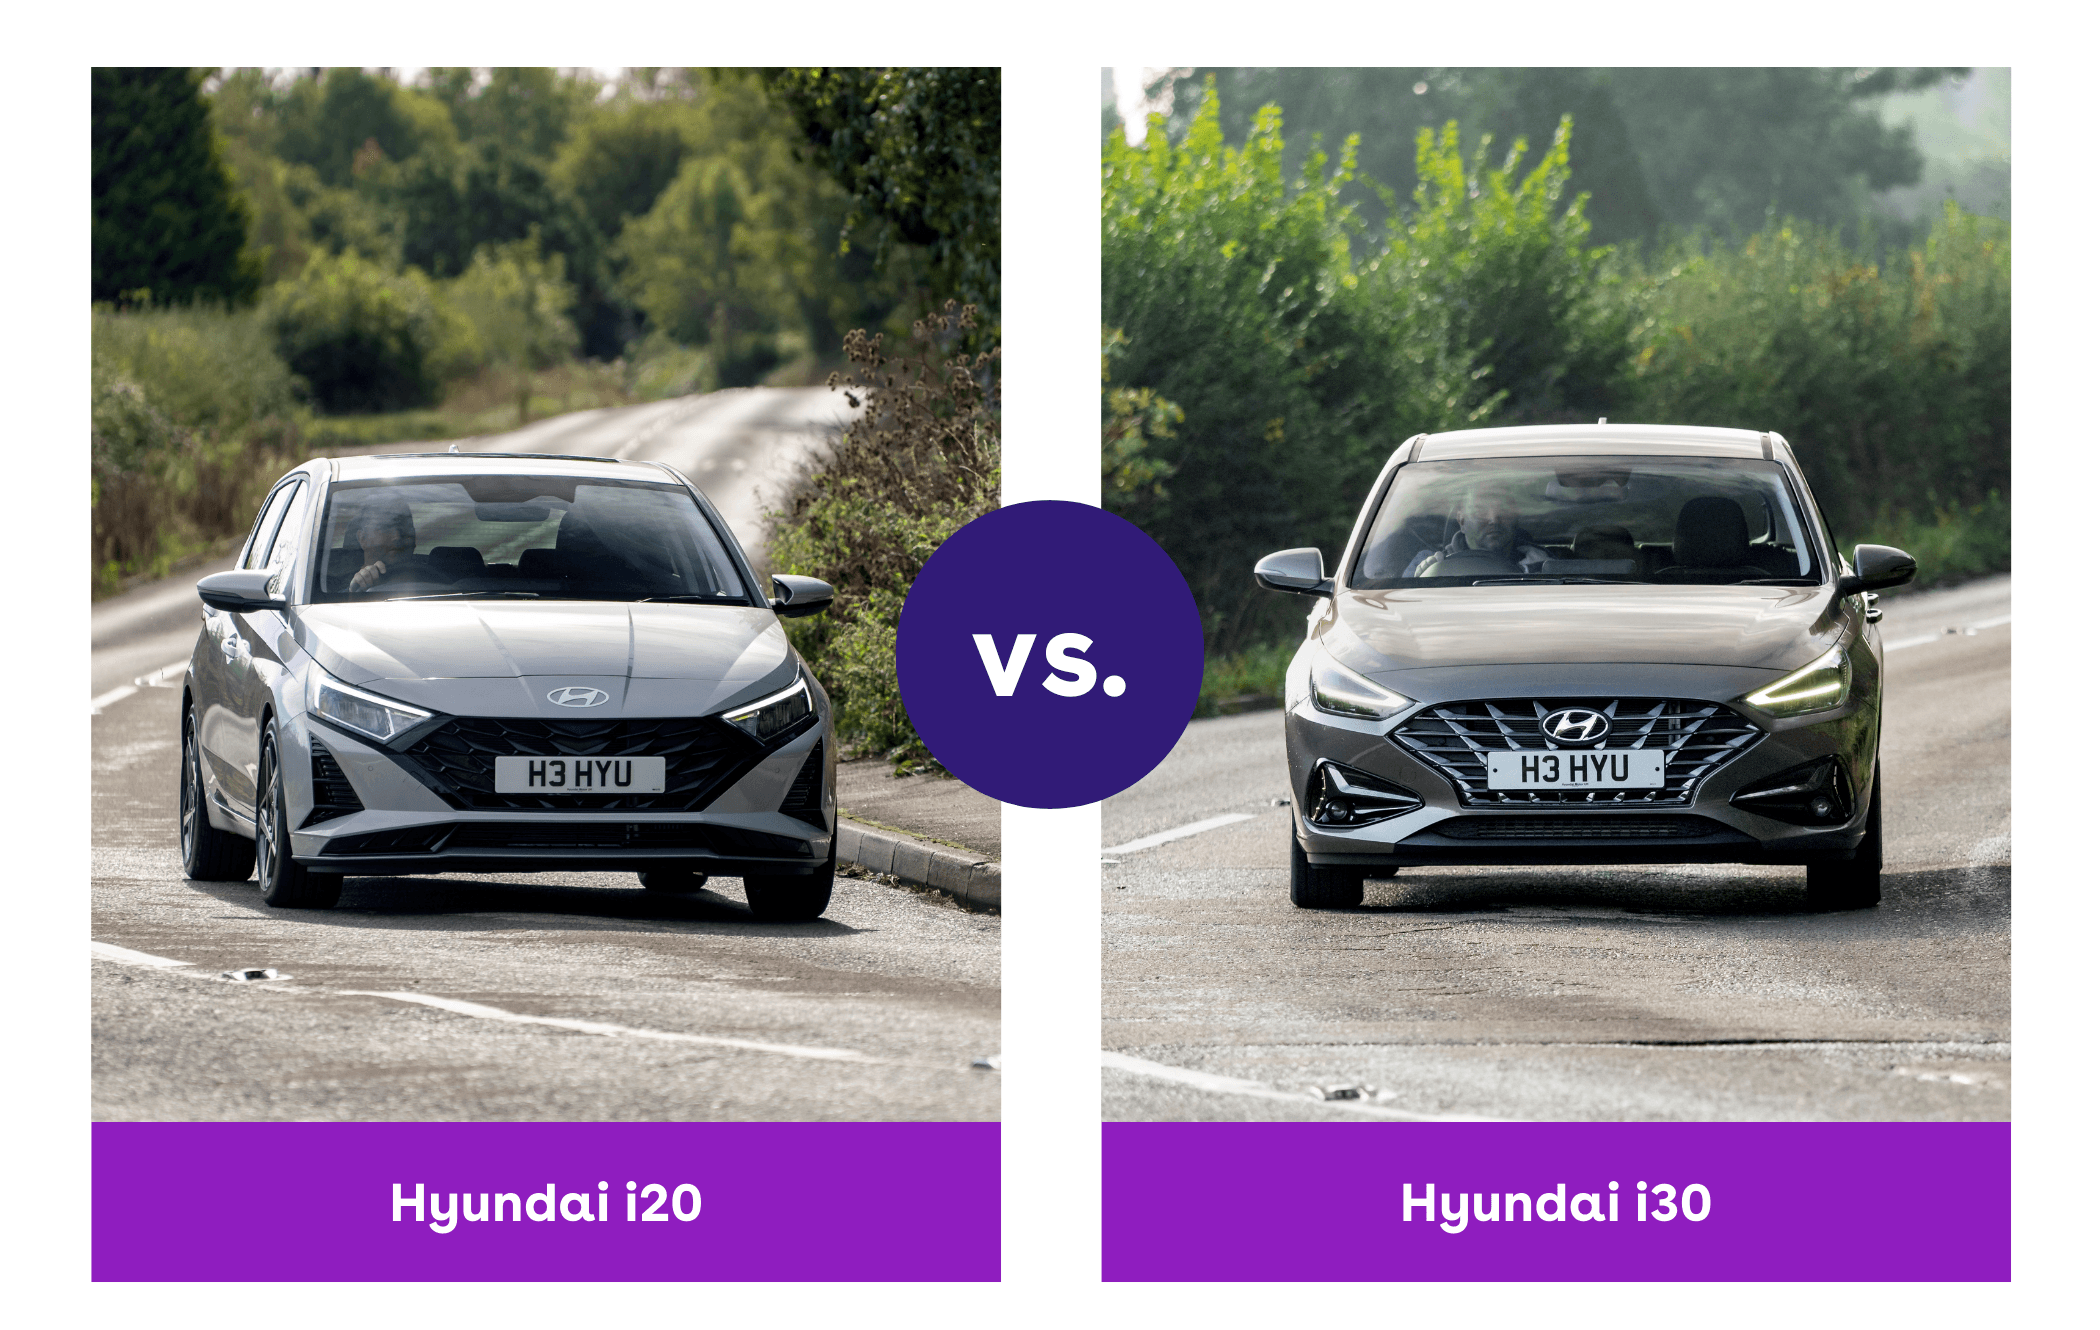 Side-by-side view of Hyundai i20 and Hyundai i30 driving